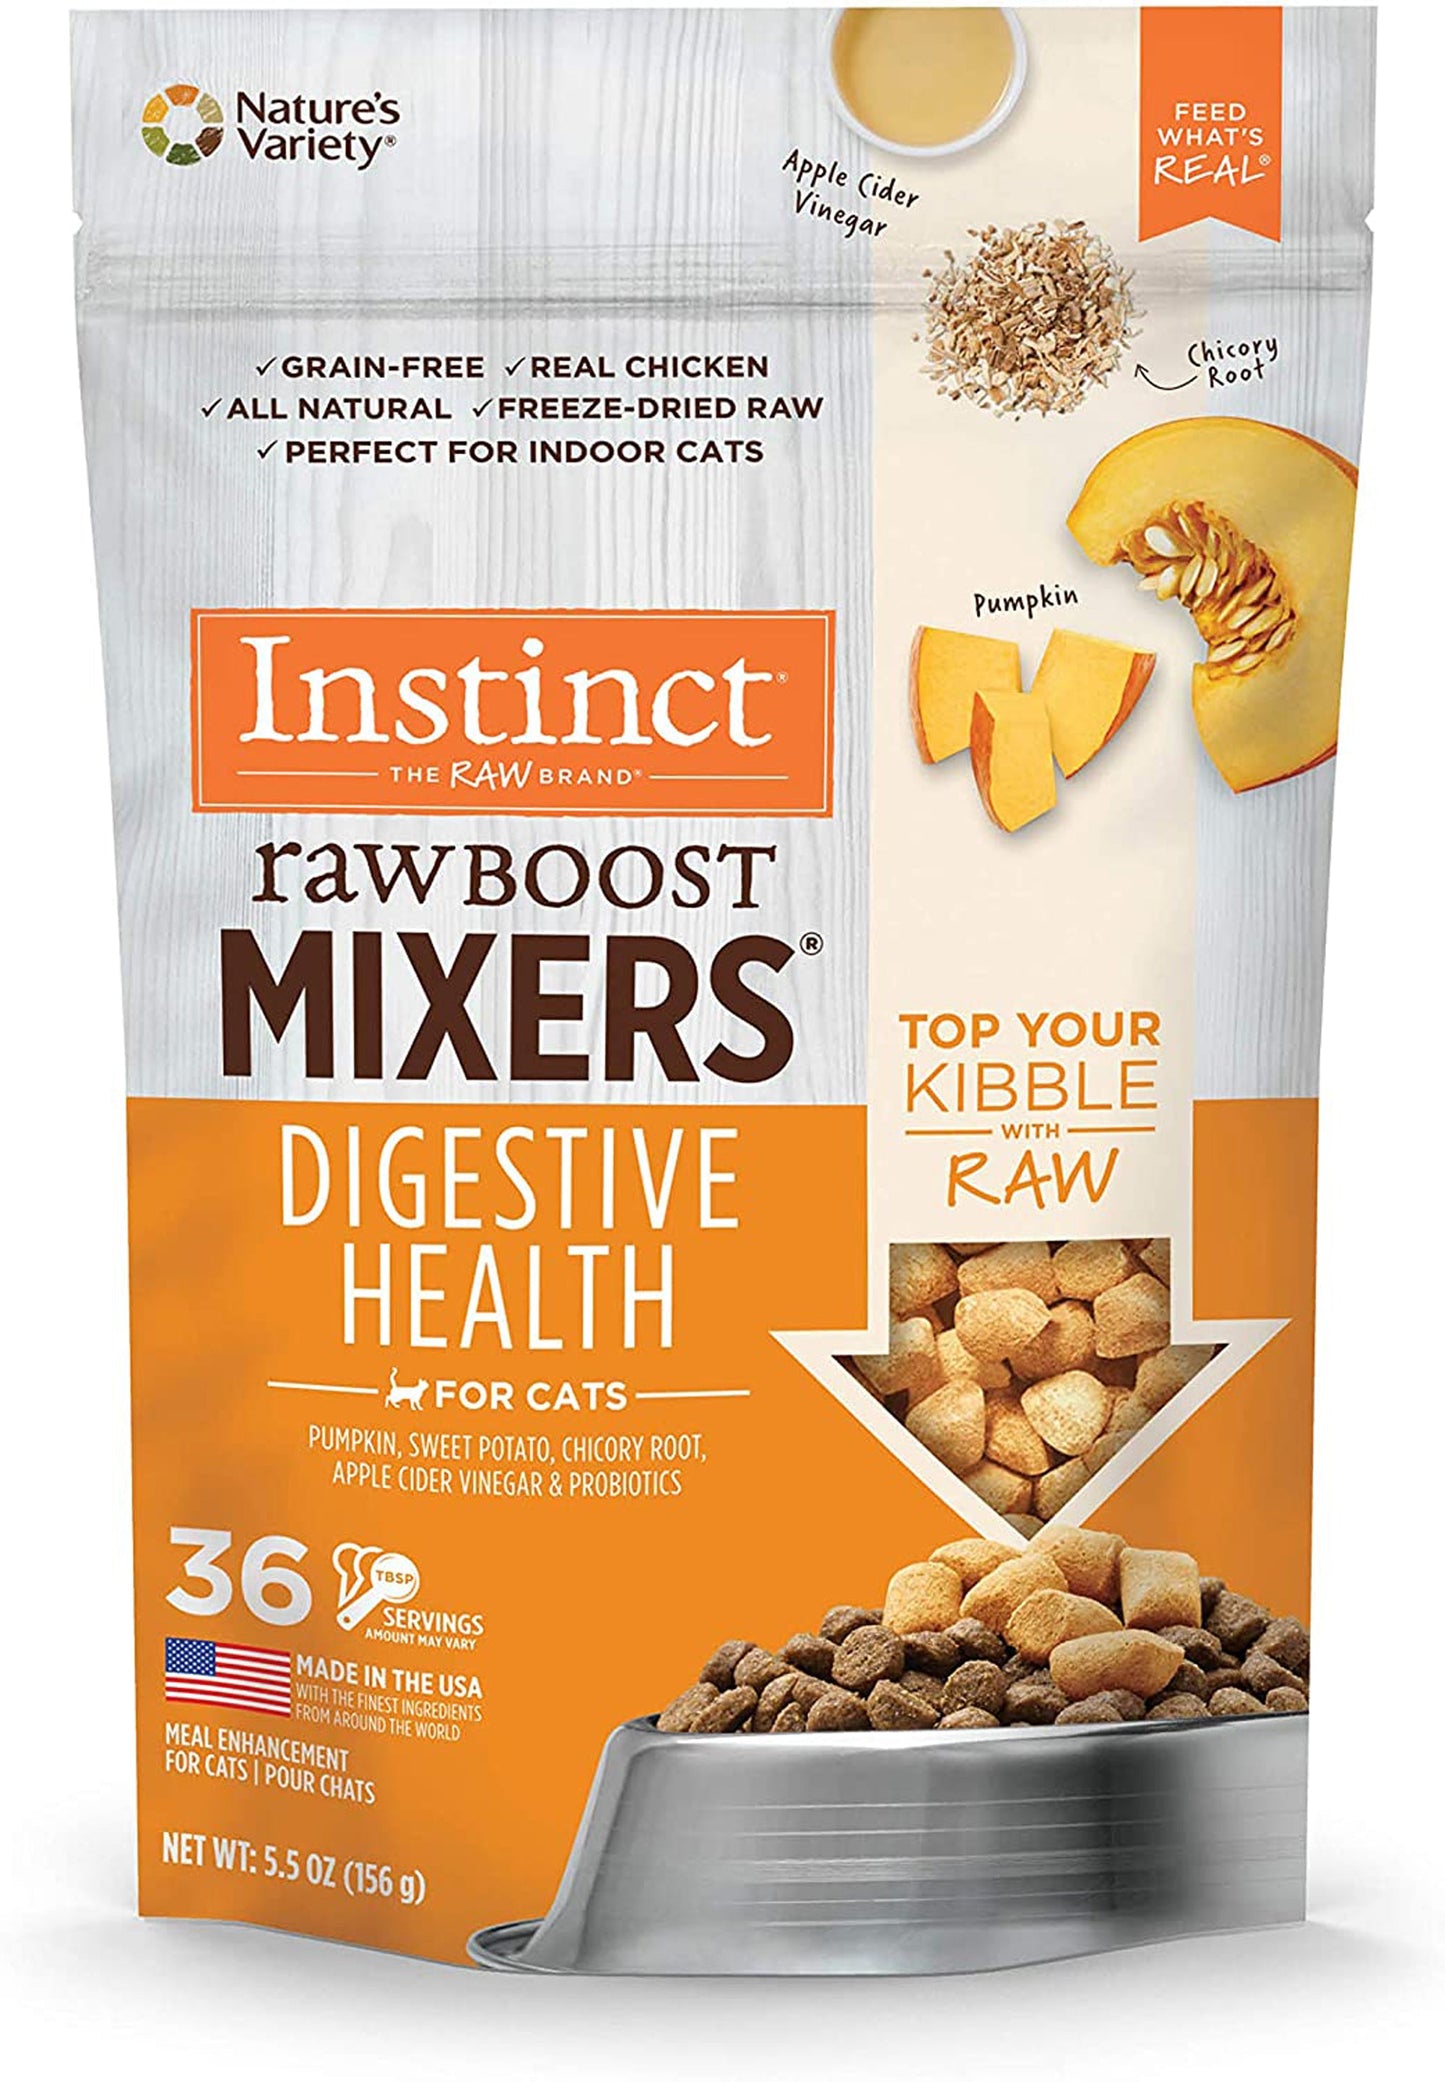 Natures Variety Cat Freeze Dried Instinct Raw Boost Mixer Digestive Health 5.5oz. (Case of 12)